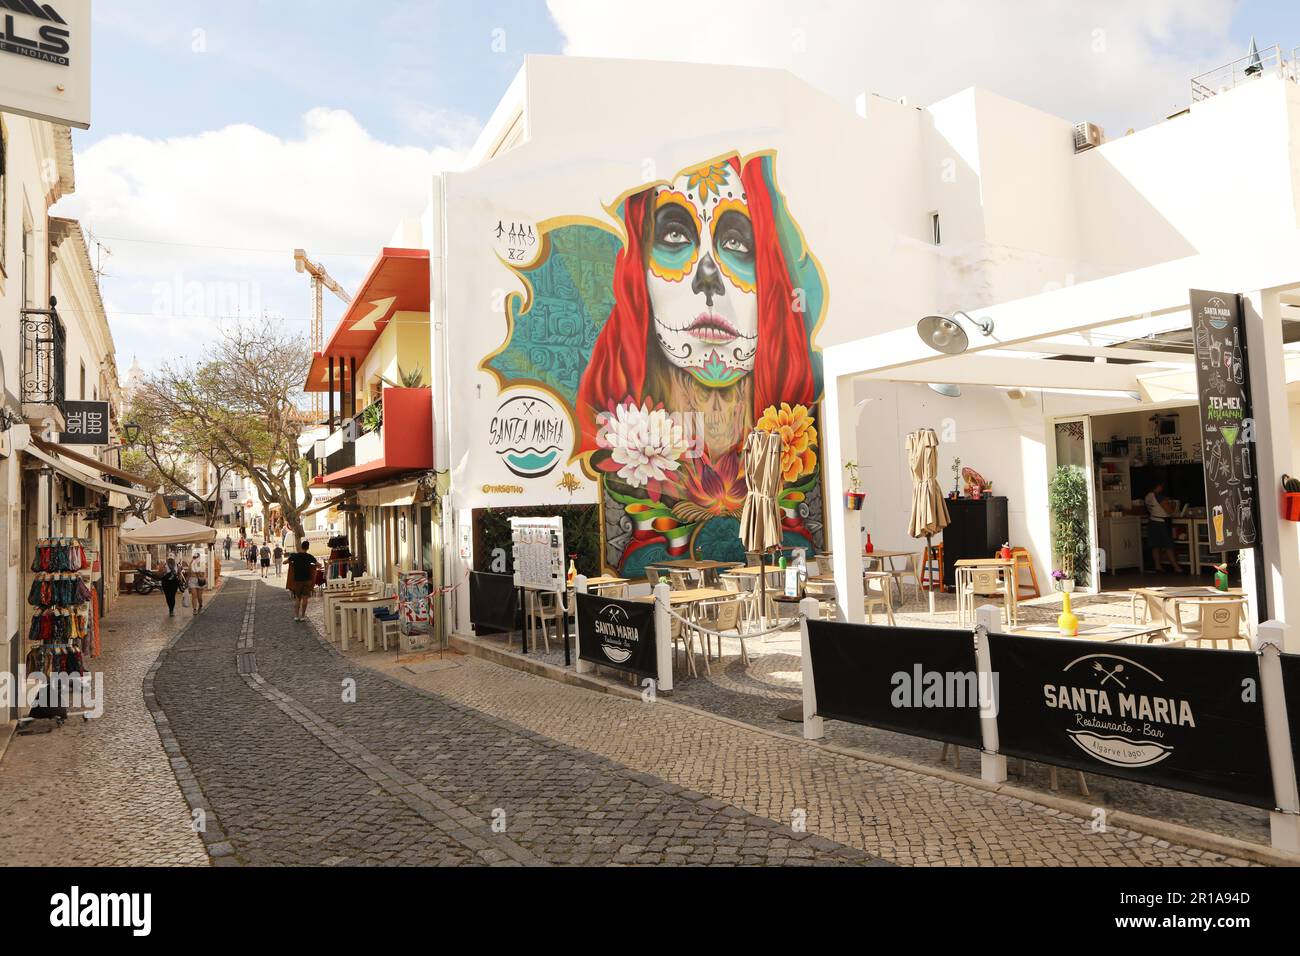 A brightly coloured mural of a woman on a restaurant wall, Old Town Lagos, Algarve, Portugal Stock Photo